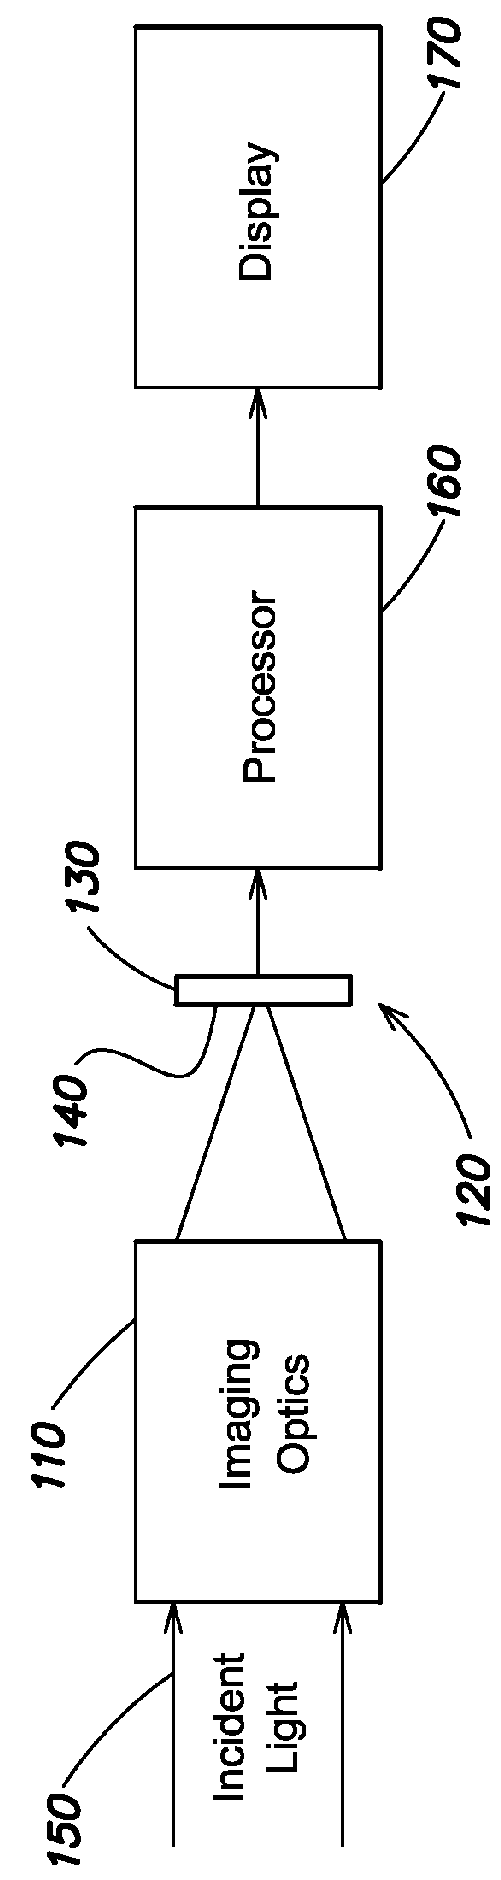 Multi-band thermal imaging sensor with integrated filter array